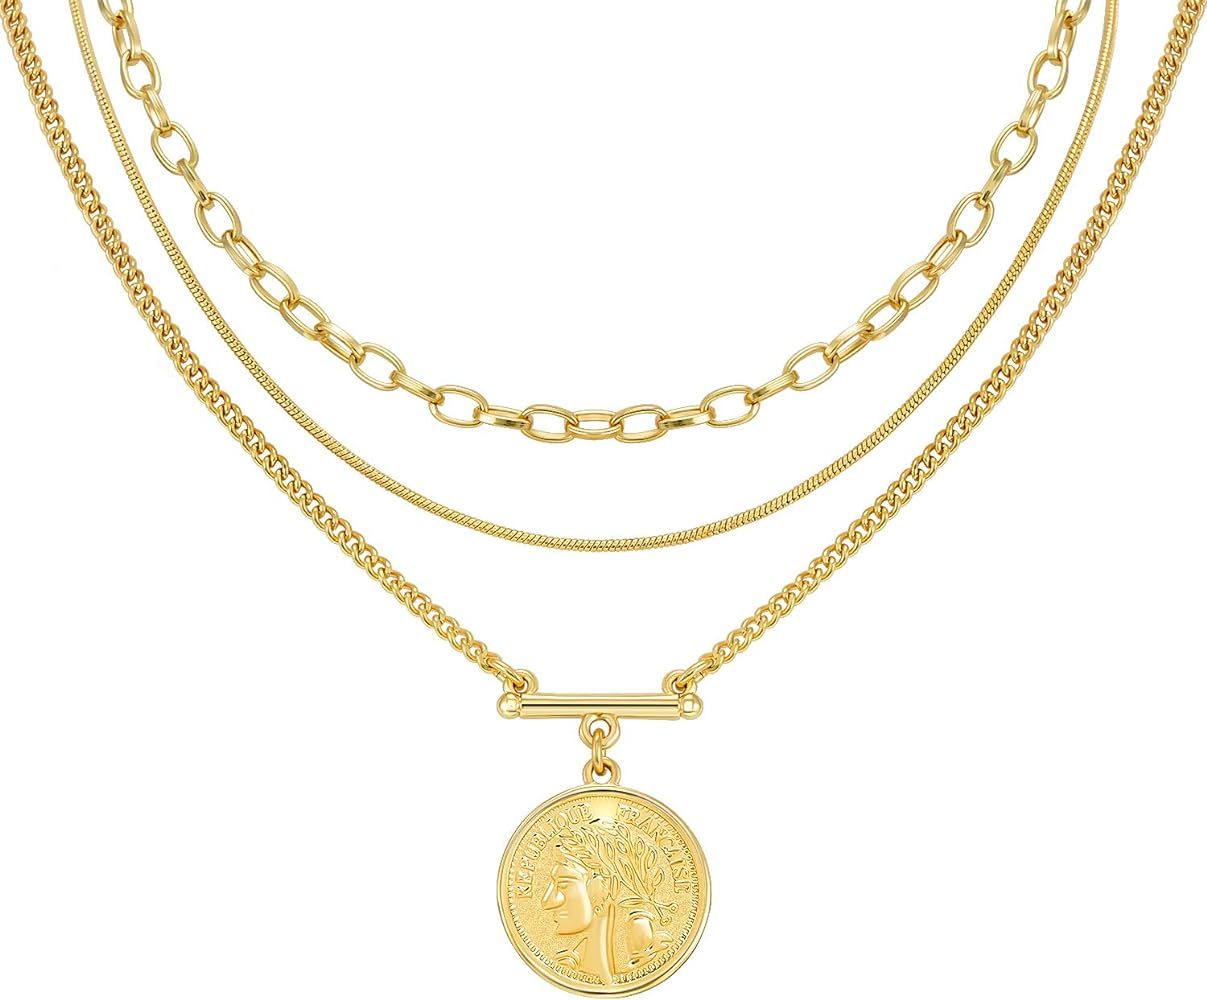 LANE WOODS Layered 18k Gold Plated Necklaces for Women - Multilayer Coin Medallion Pendant Necklace  | Amazon (US)